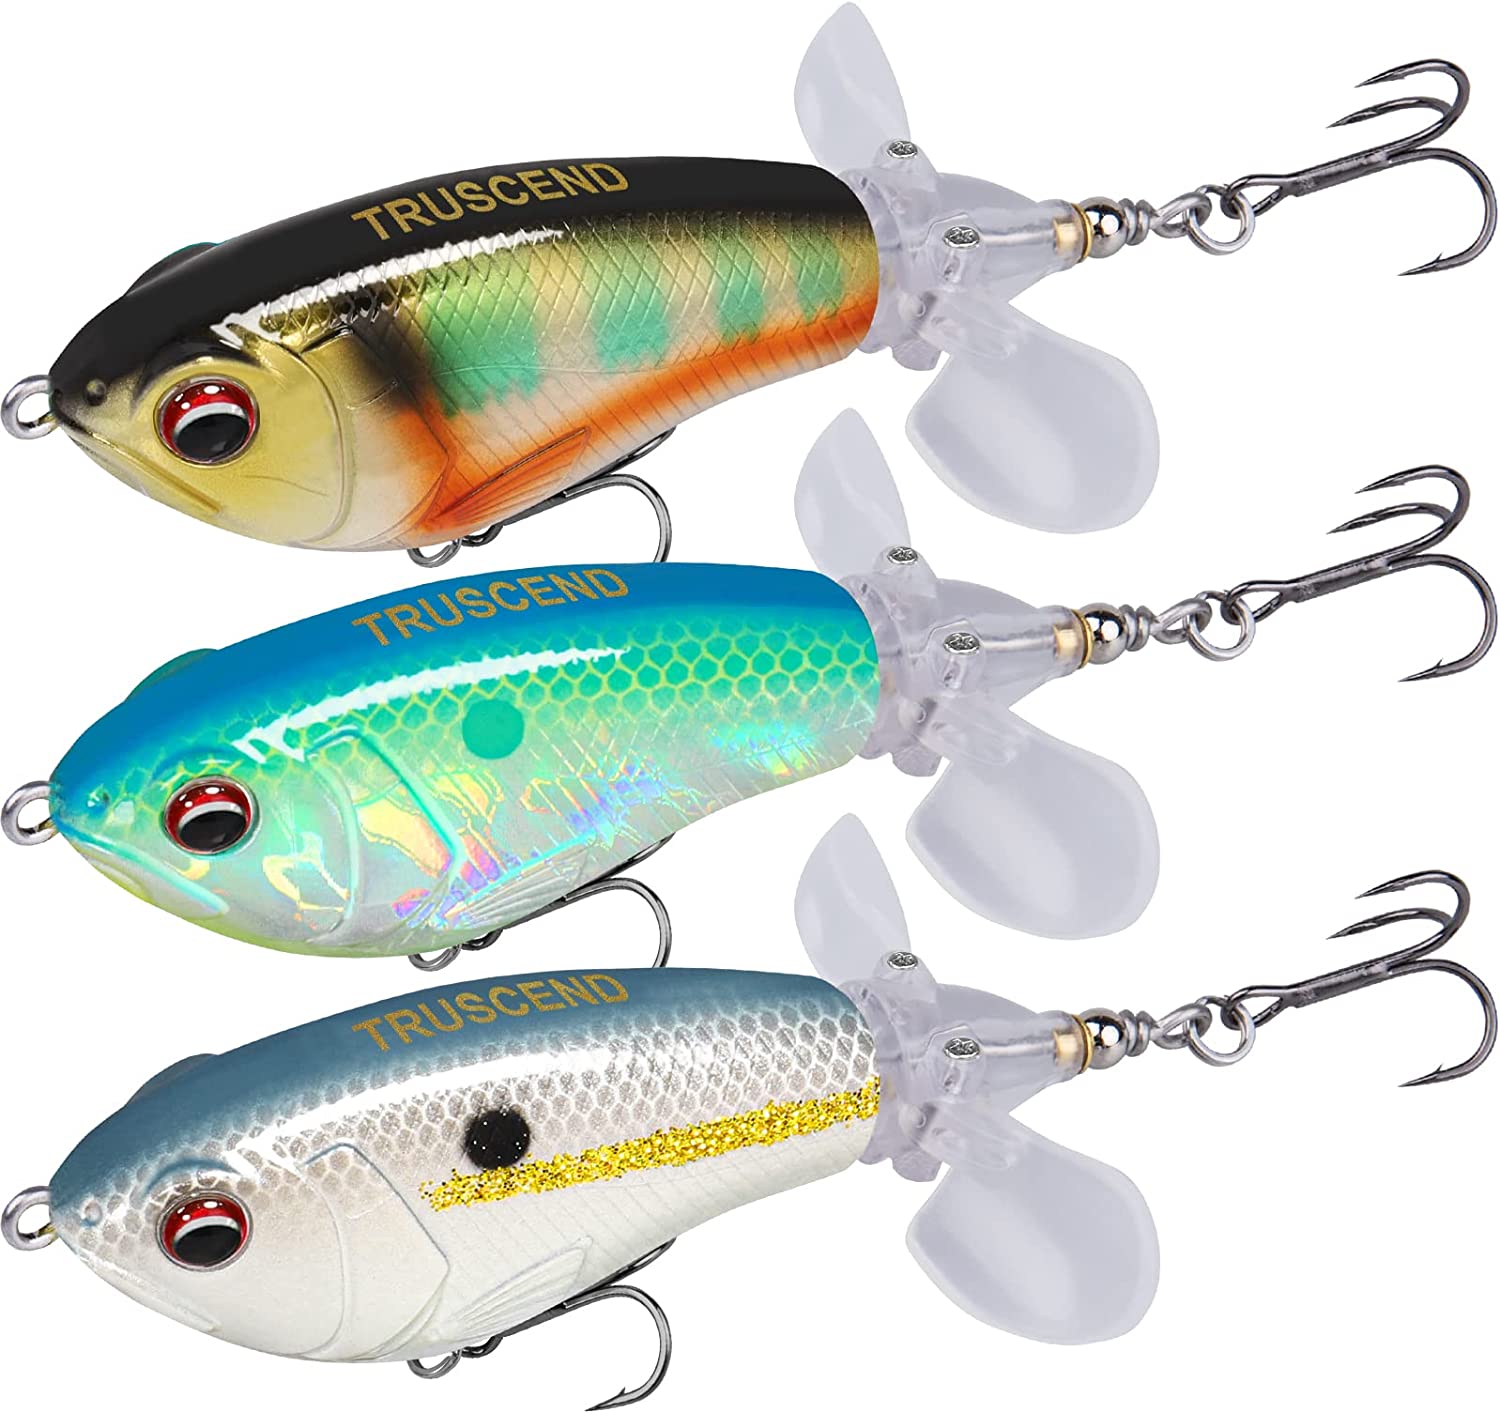 What Is a Fishing Lure and What Fish Are Attracted to It?